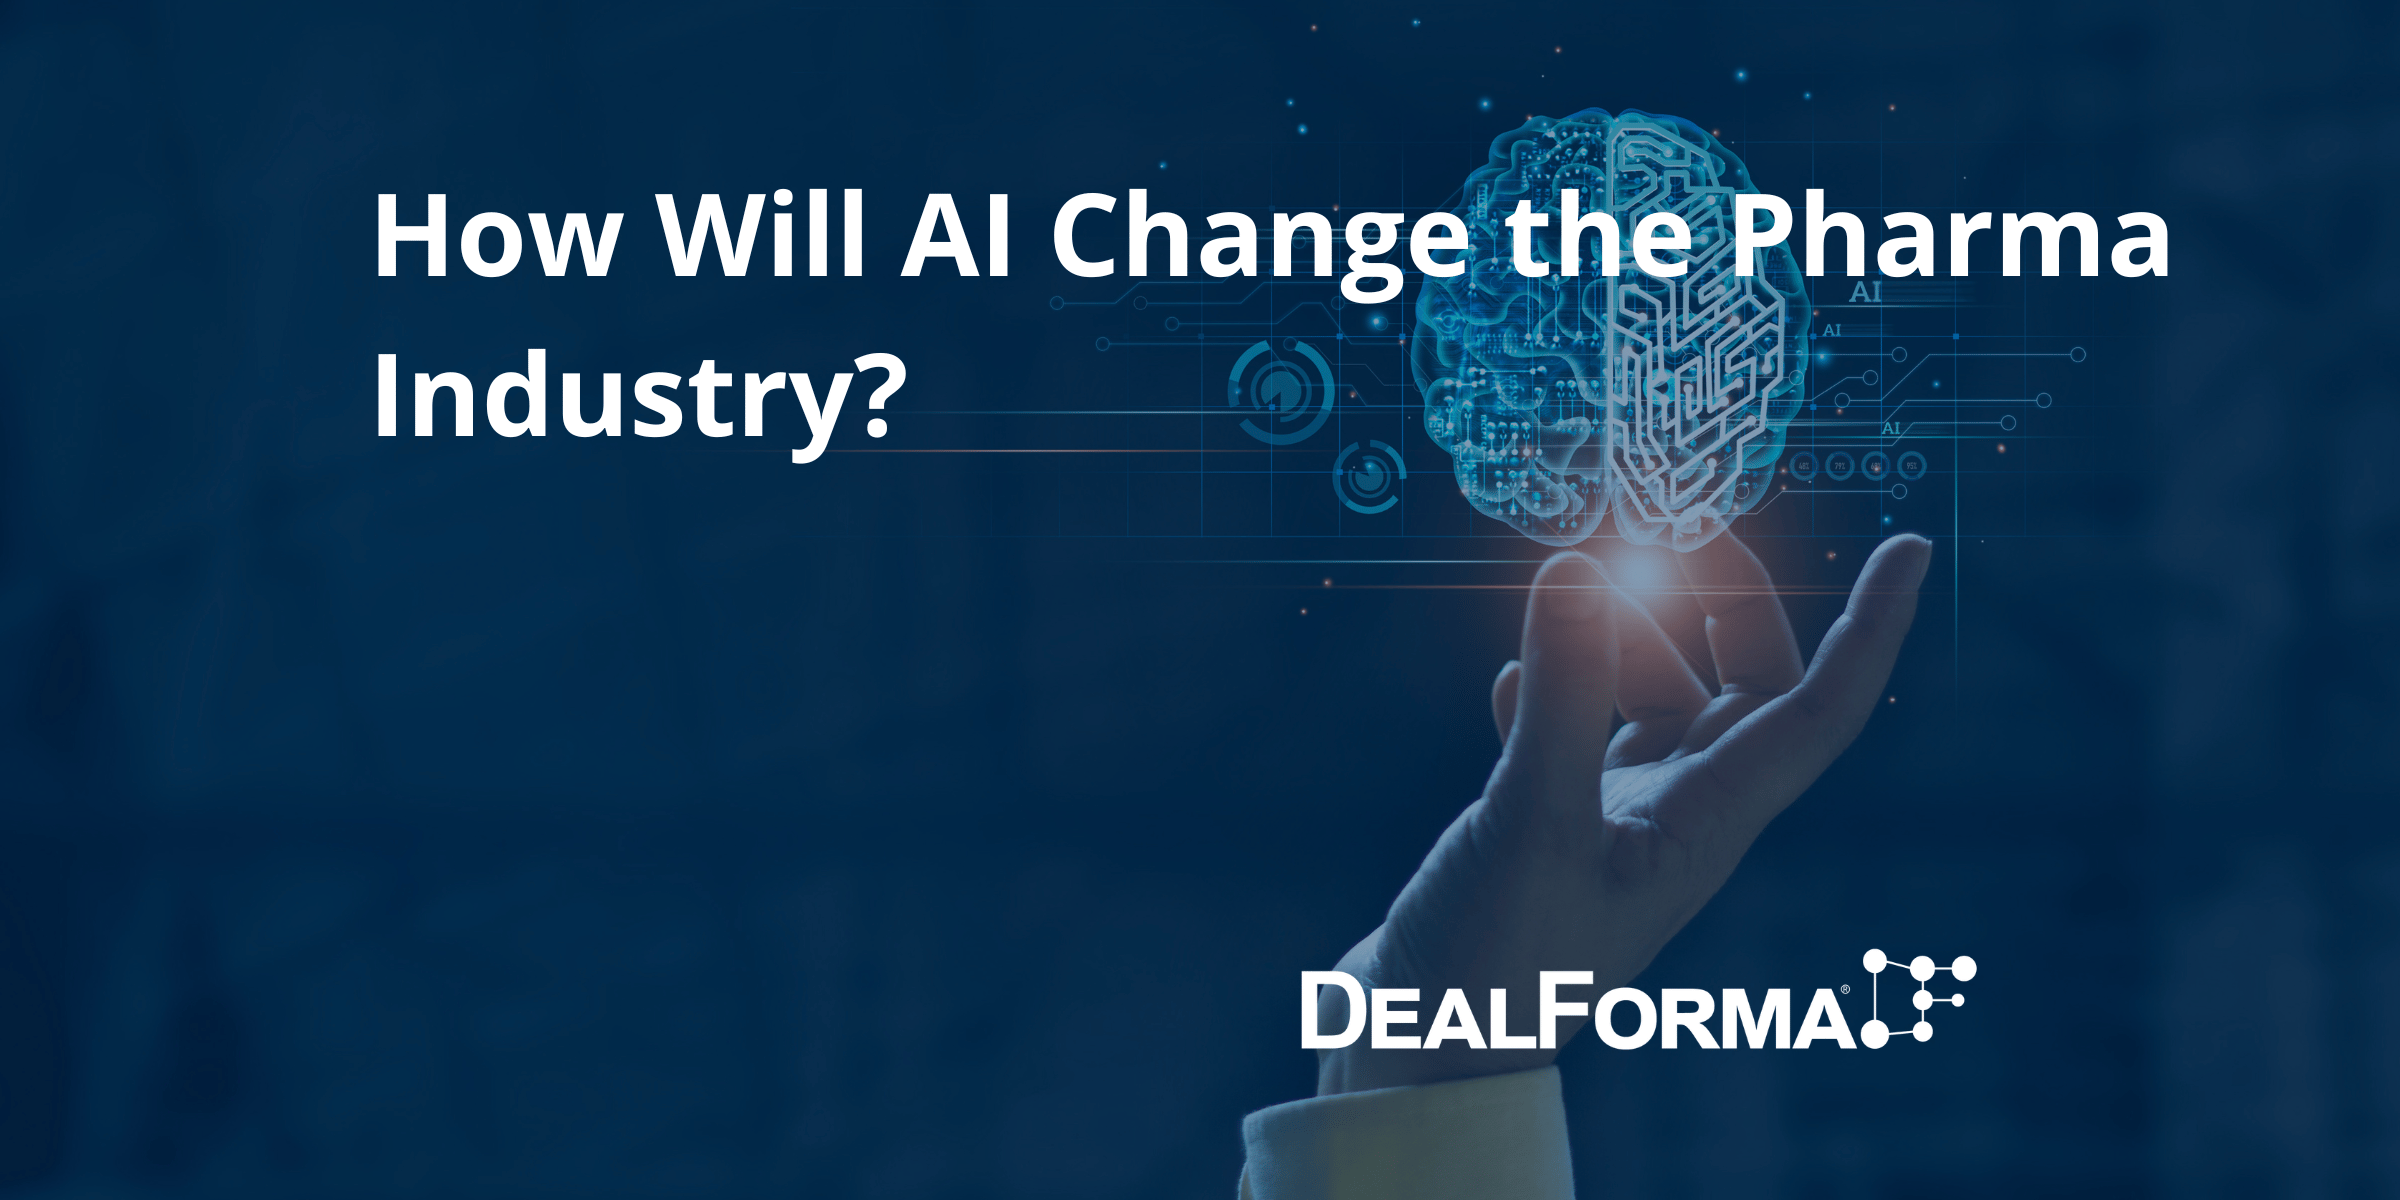 How Will AI Change the Pharma Industry?